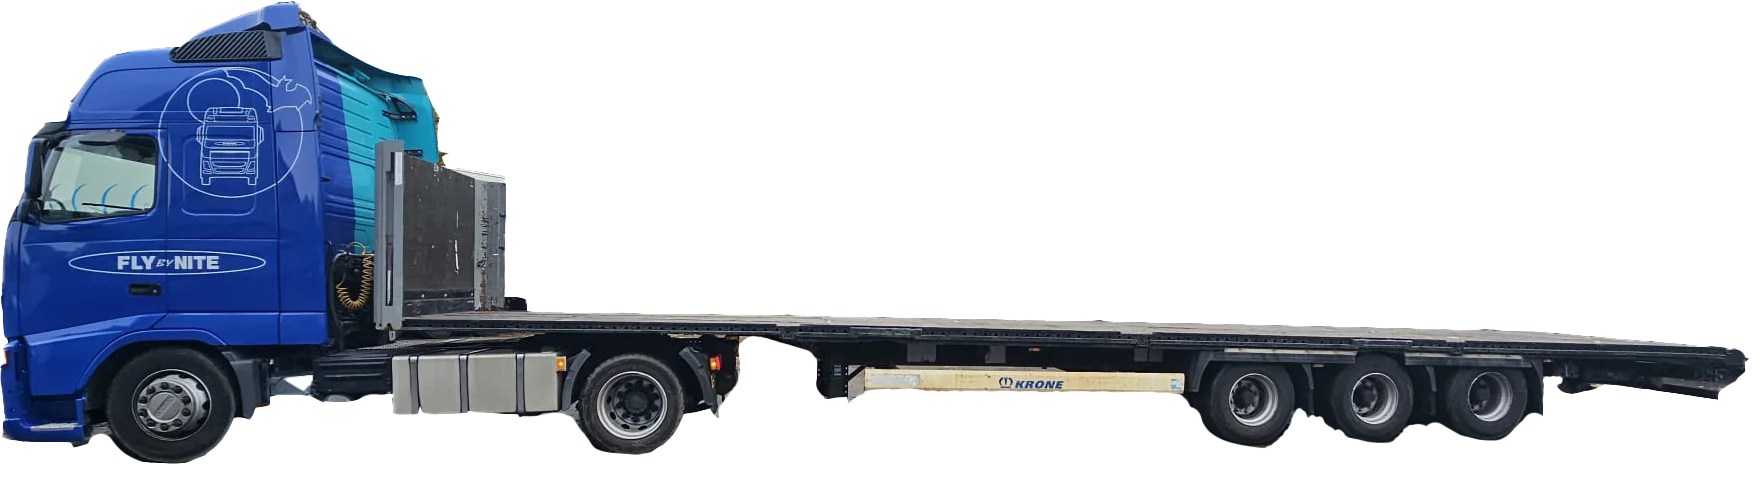 Image of Flatbed